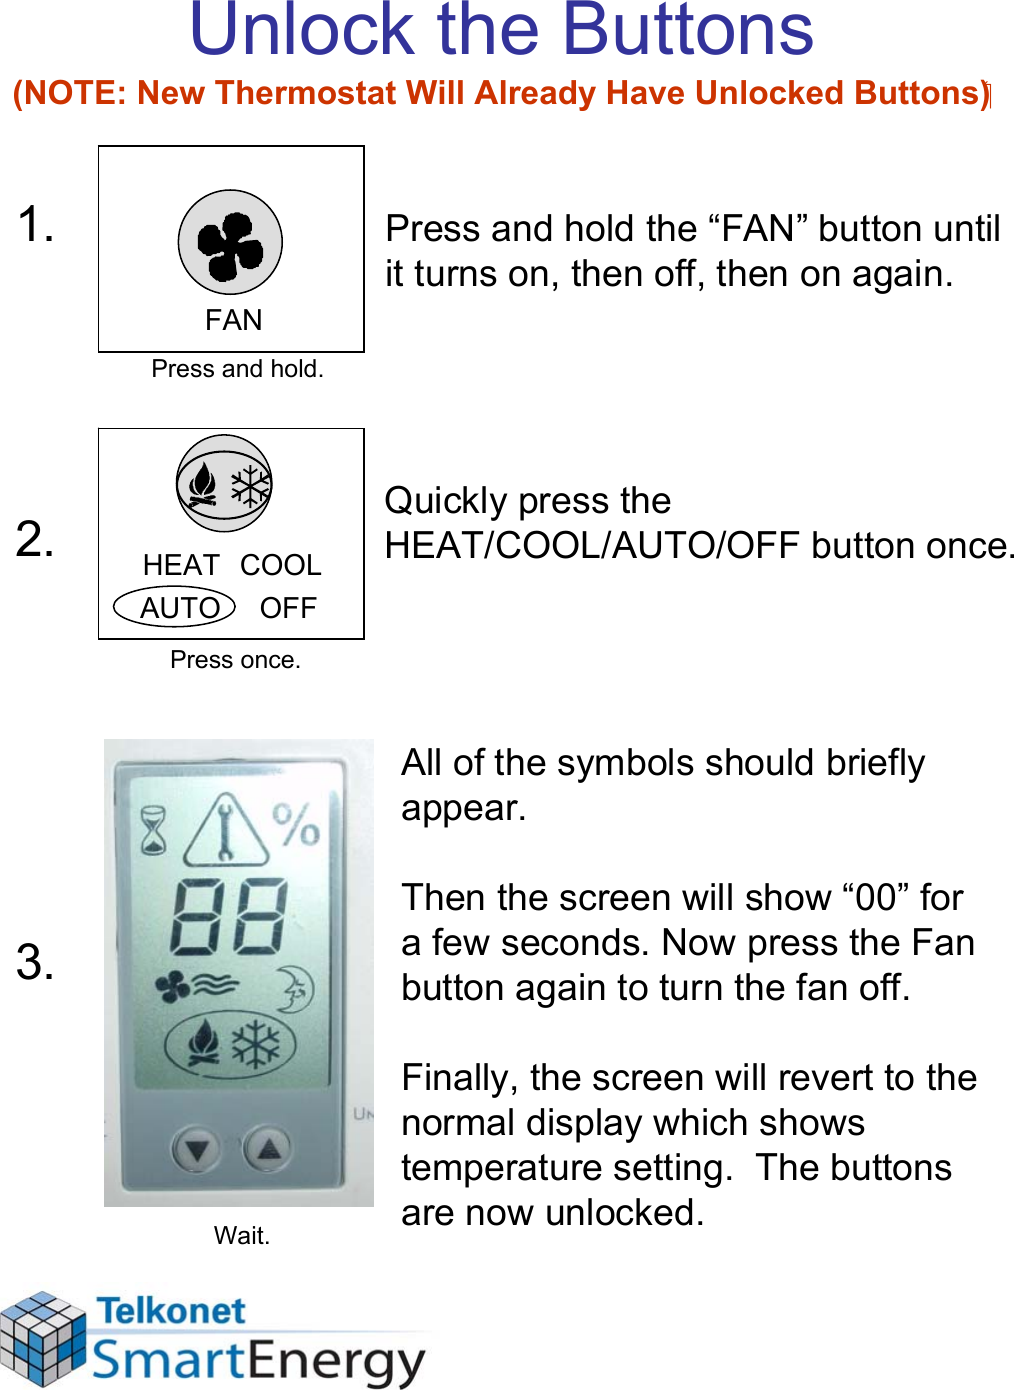 Unlock the Buttons (NOTE: New Thermostat Will Already Have Unlocked Buttons)‏Press and hold the “FAN” button until it turns on, then off, then on again.Quickly press the HEAT/COOL/AUTO/OFF button once.All of the symbols should briefly appear. Then the screen will show “00” for a few seconds. Now press the Fan button again to turn the fan off.Finally, the screen will revert to the normal display which shows temperature setting.  The buttons are now unlocked.FANHEAT  COOLAUTO     OFF1.2.3.Press and hold.Press once.Wait.